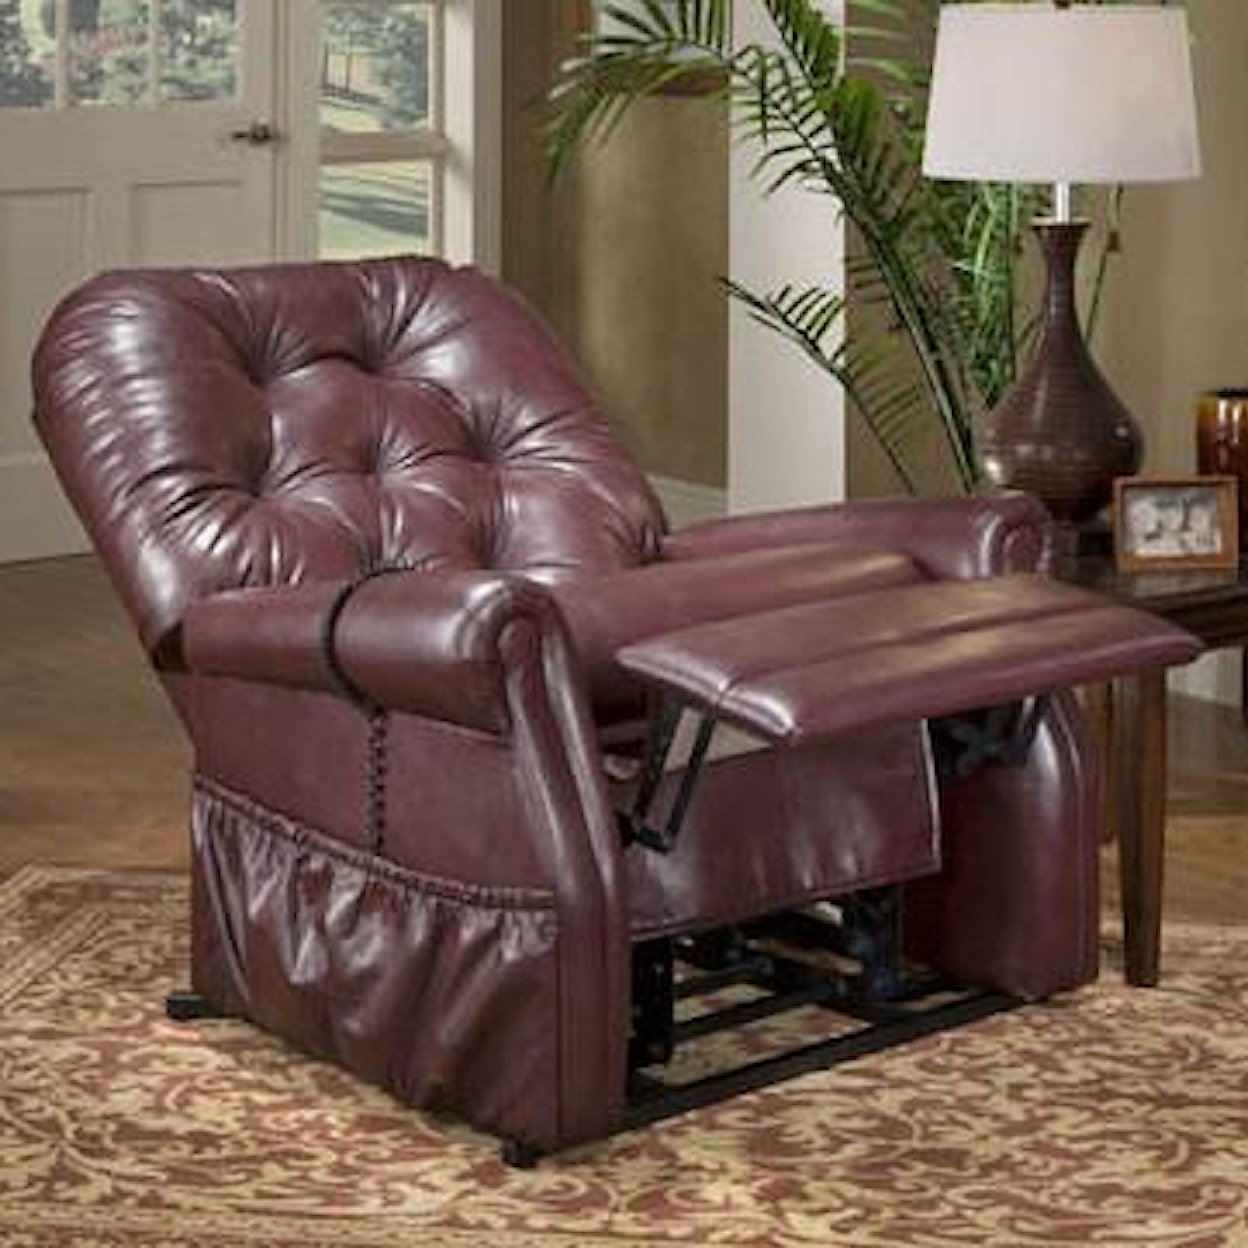 Med-Lift & Mobility 35 Series Lift Recliner